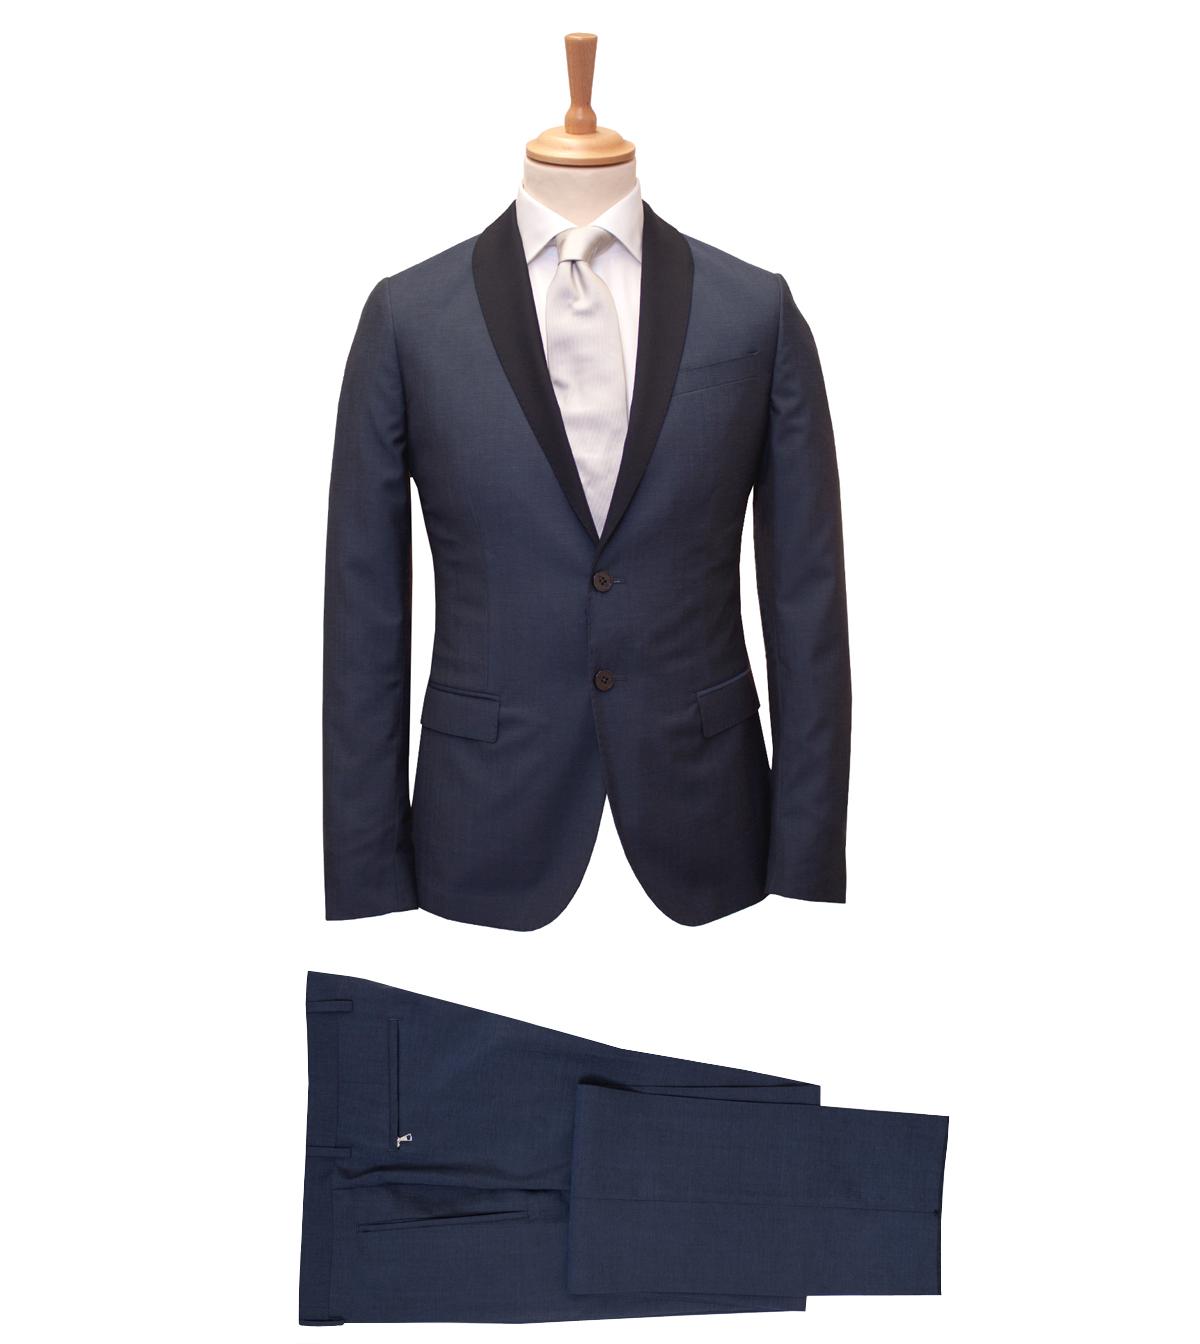 Foto Paul Smith PS Petrol Blue Wool/Mohair Unstructured Suit foto 25293